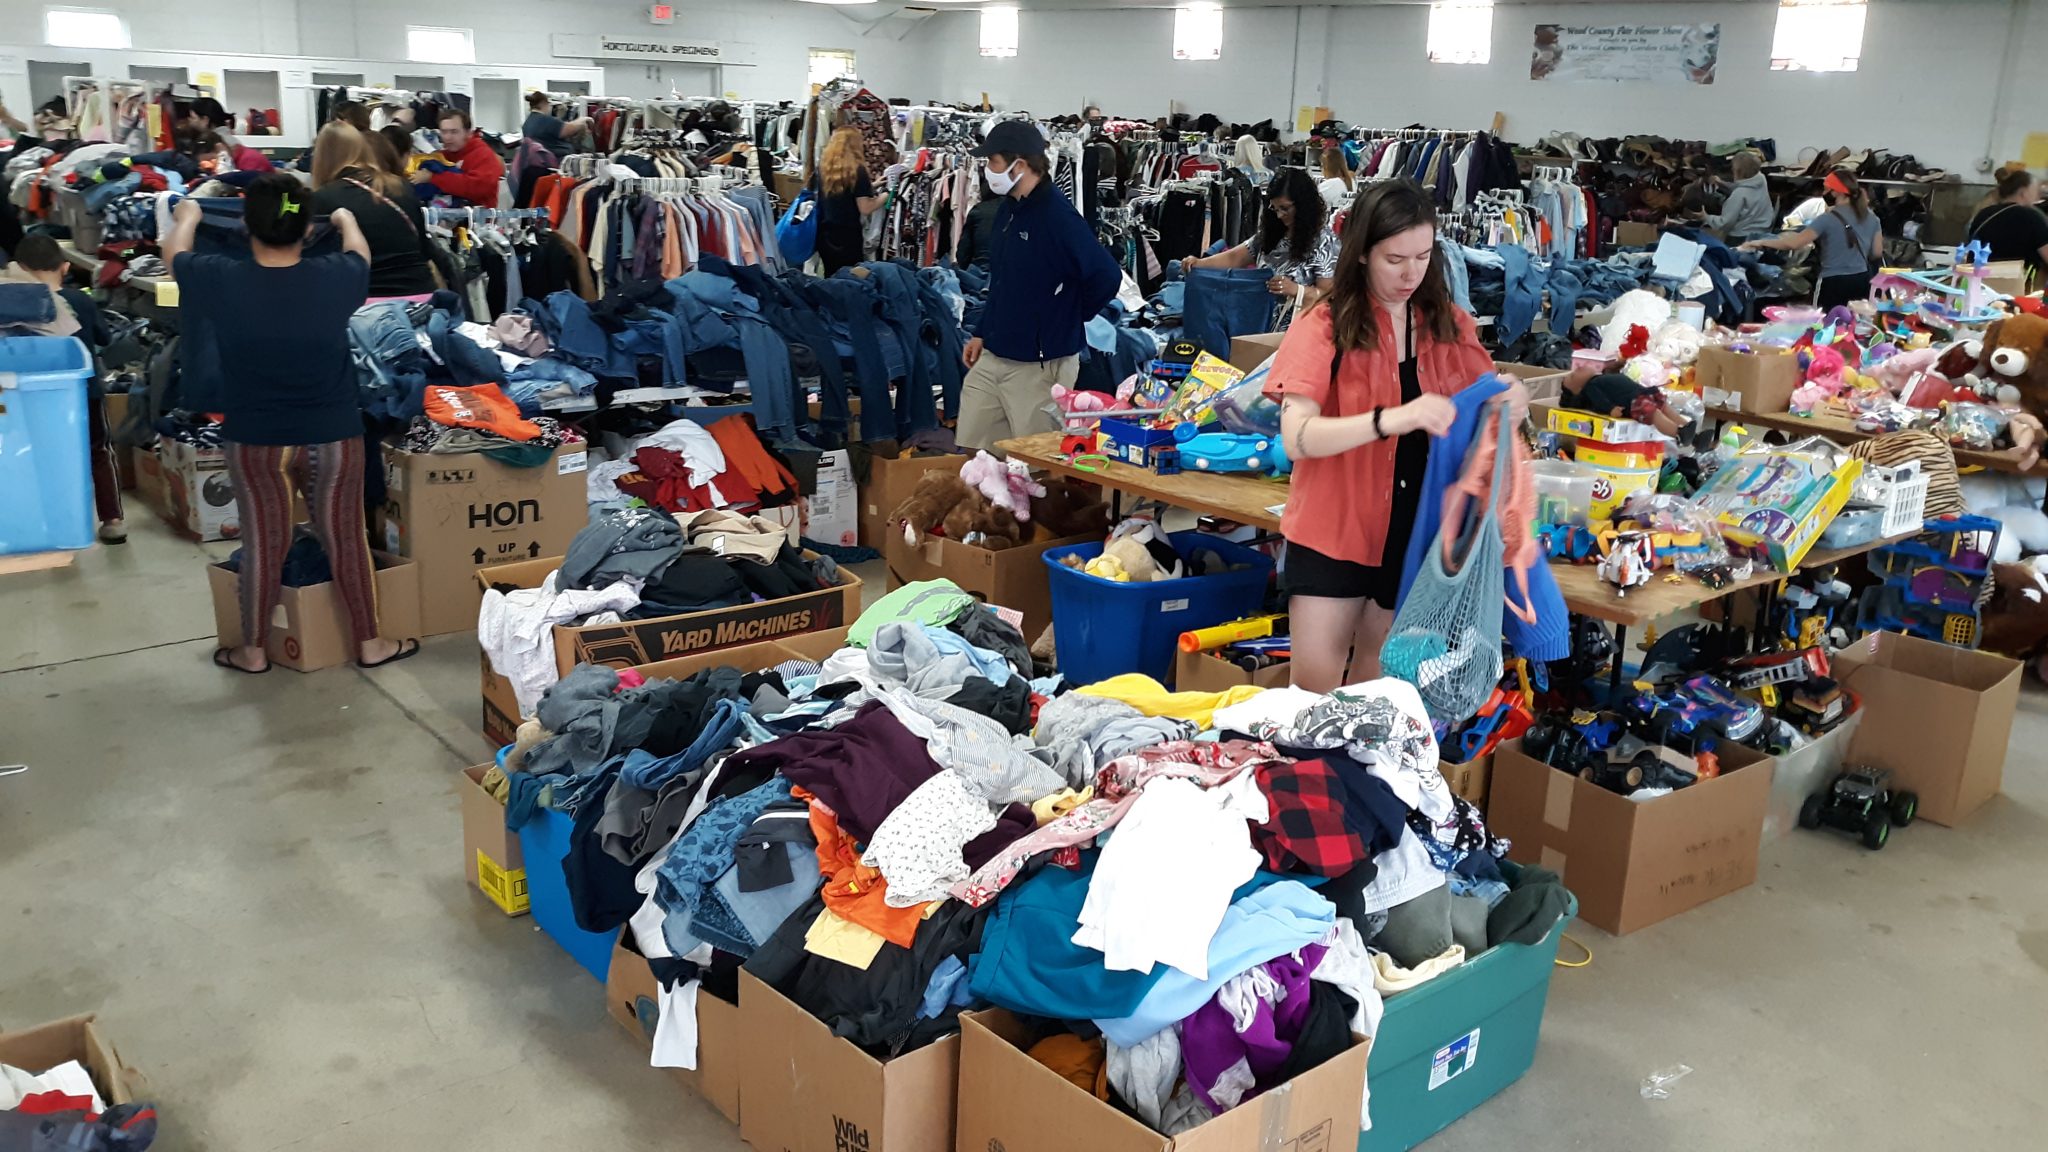 Humane society garage sale offers things you didn’t even know you